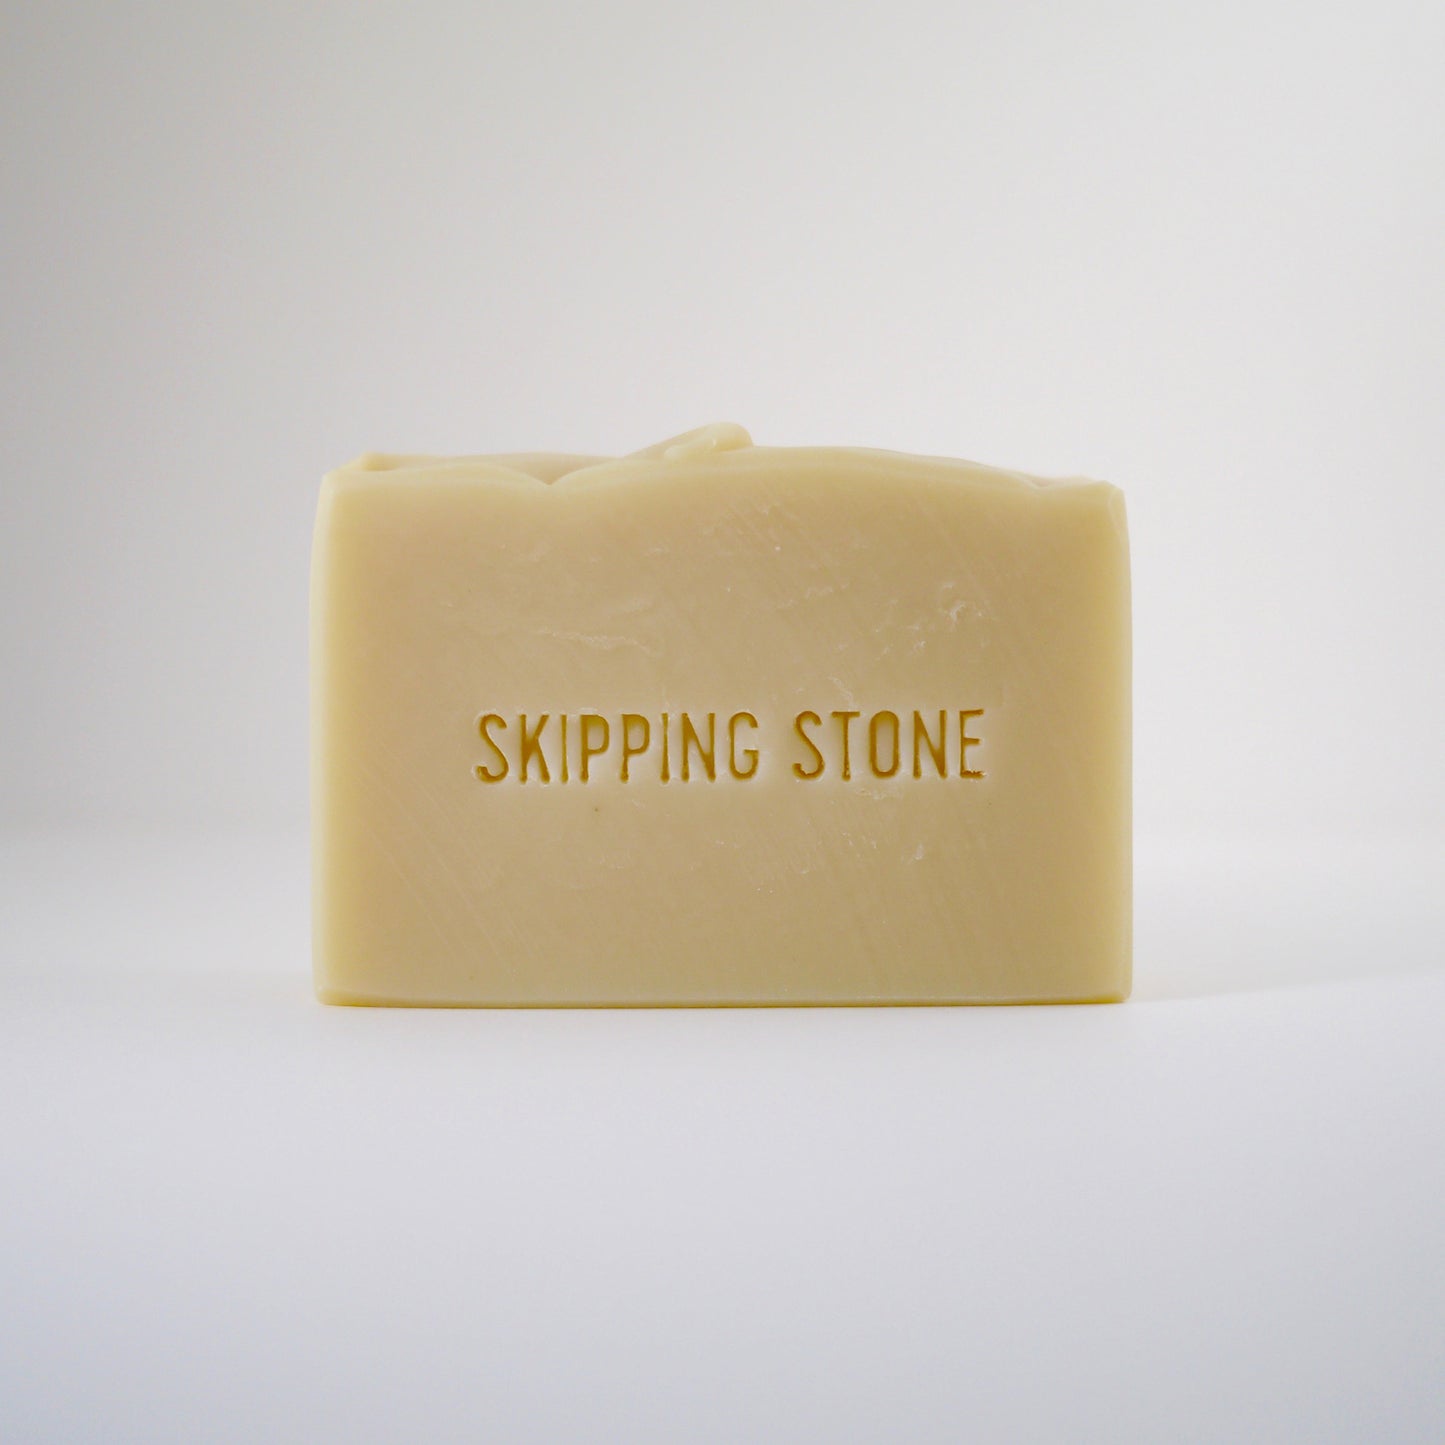 Skipping Stone Soap Pure. Body + Face Soap – unscented